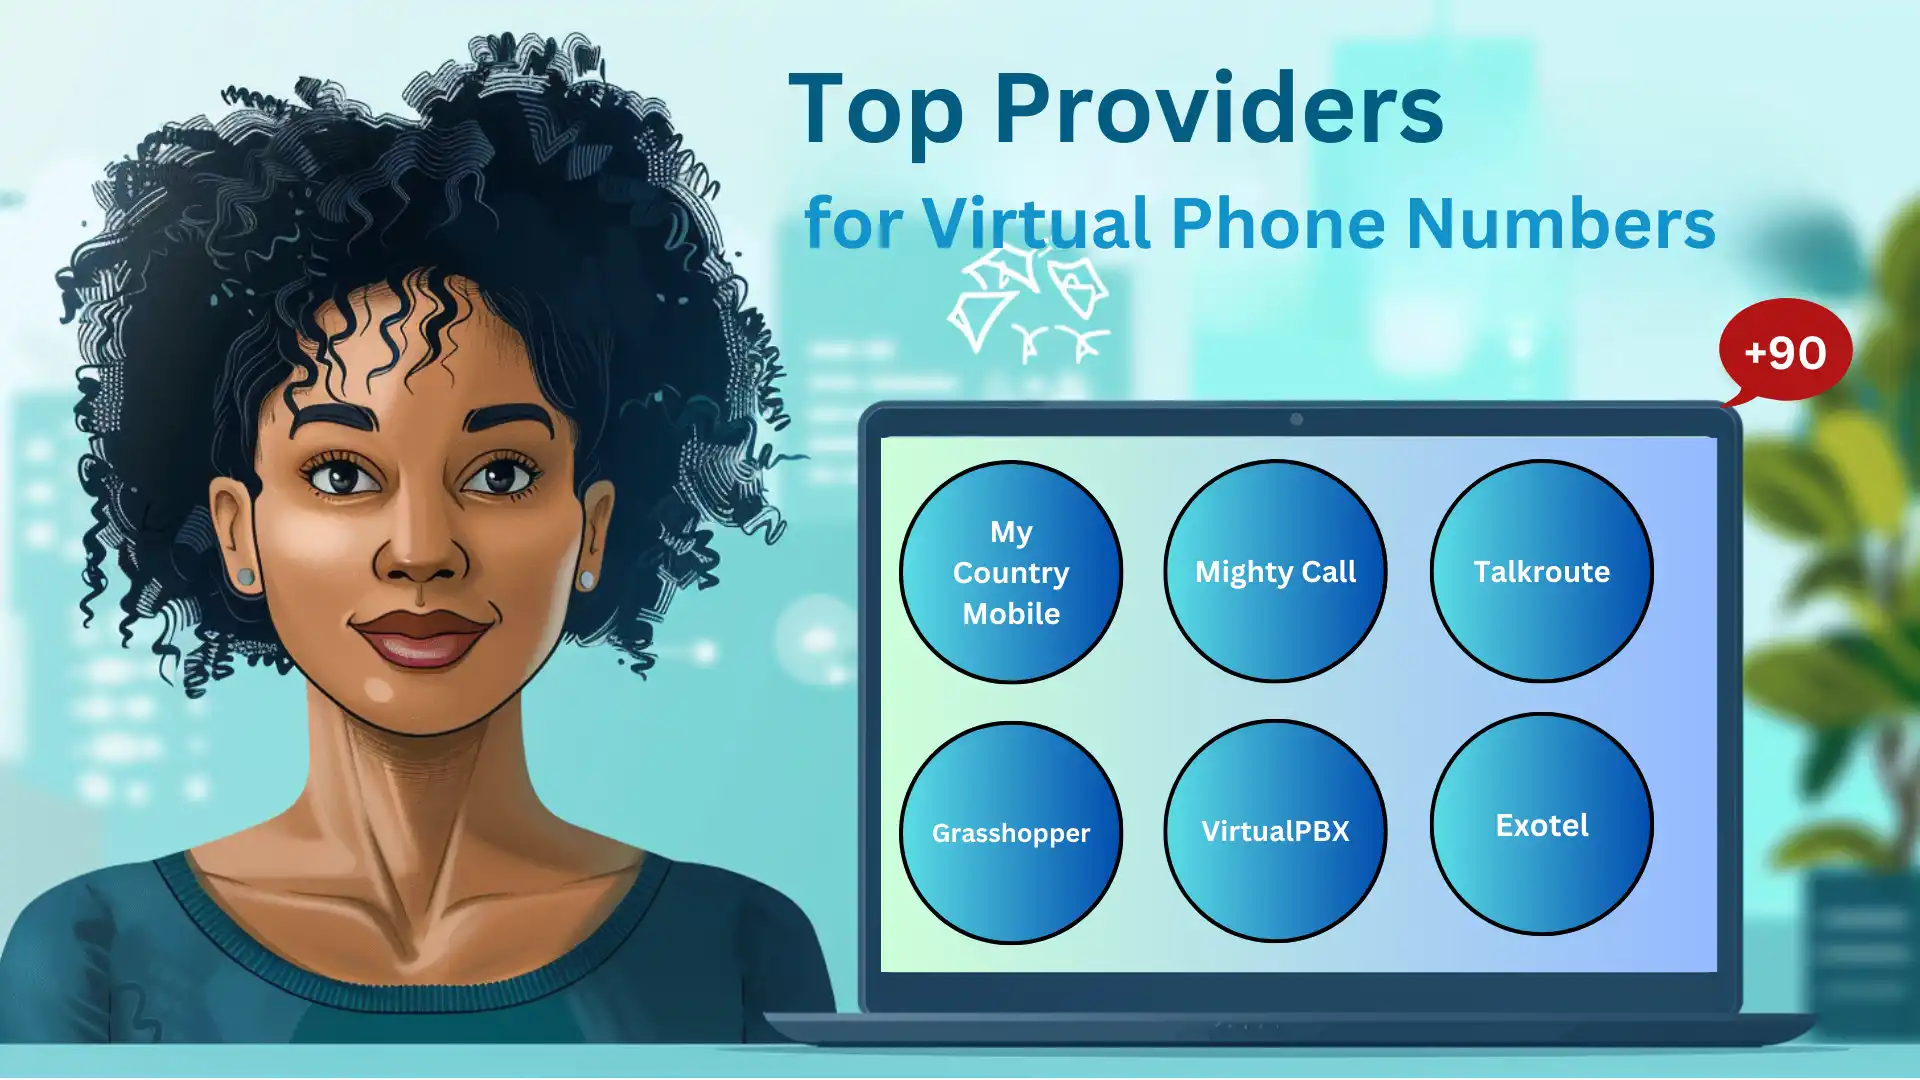 Top Providers for Virtual Phone Numbers for WhatsApp